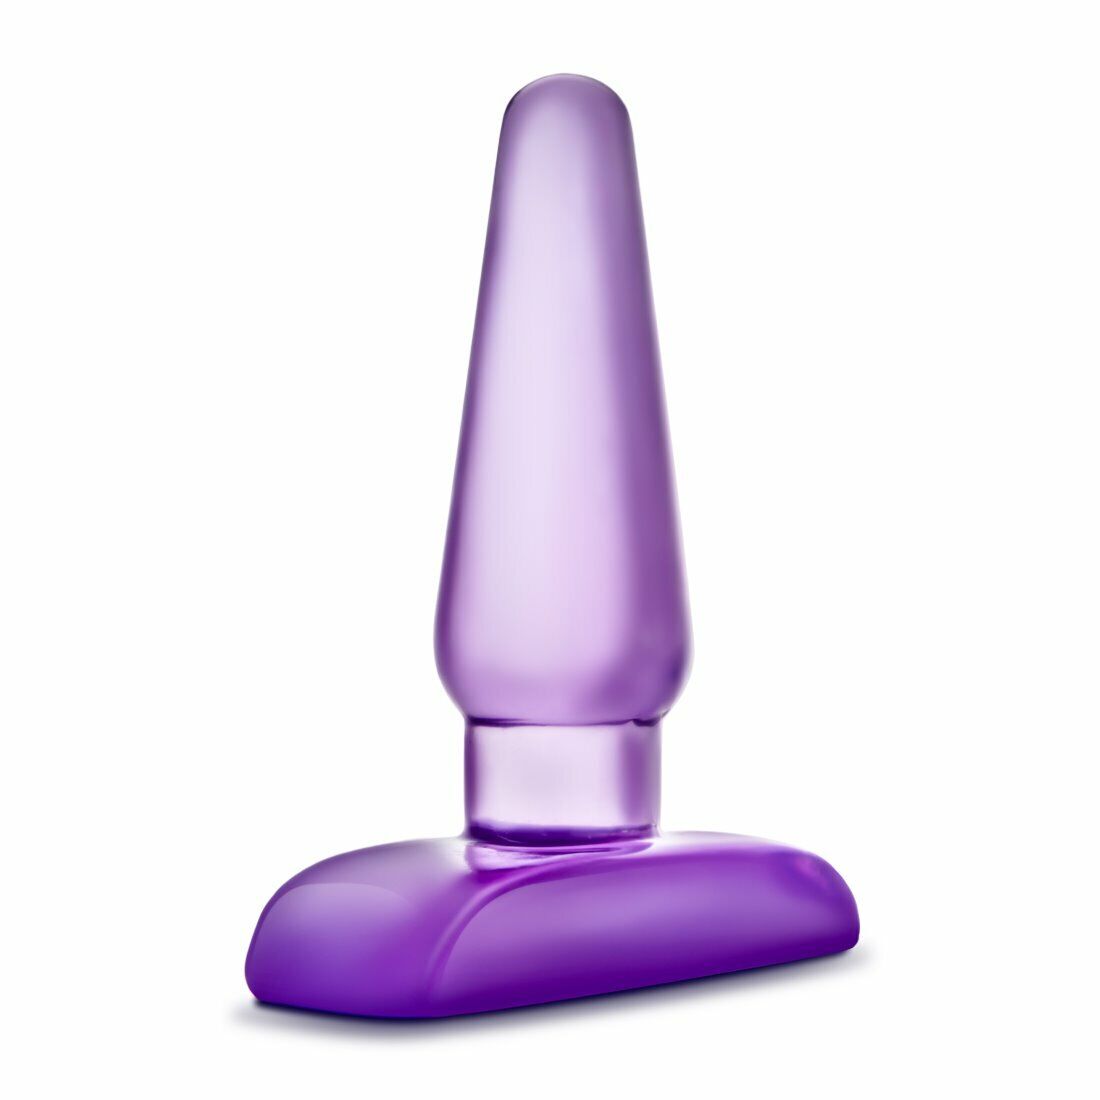 4" Beginner Small Anal Plug Butt Plug Anal Sex Toys for Couples Women Men